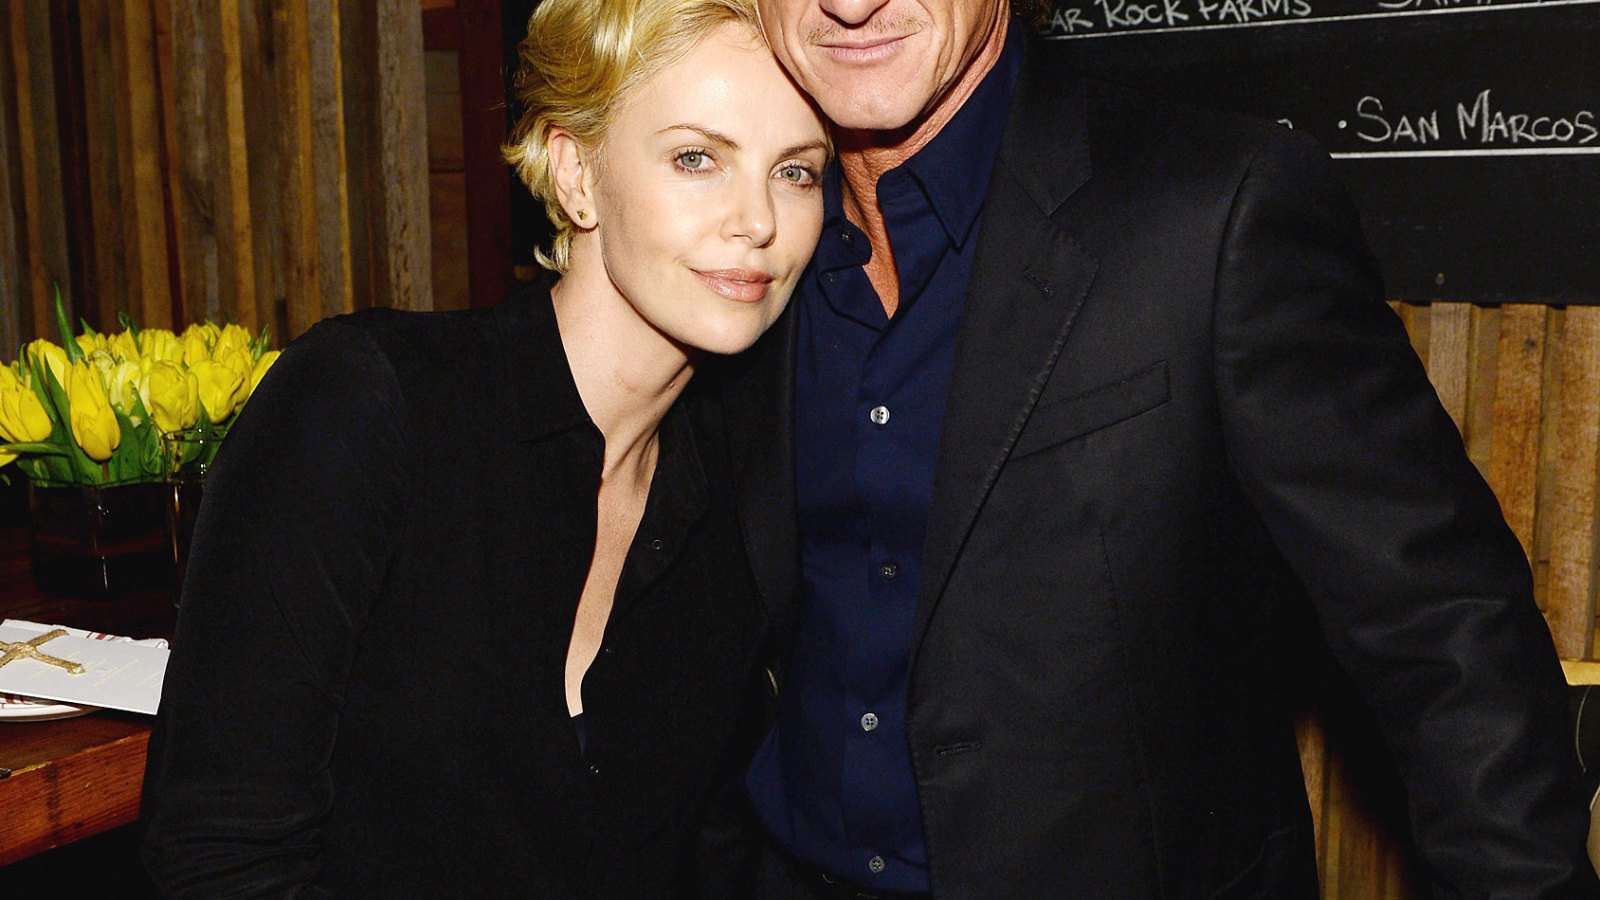 Charlize Theron and Sean Penn on February 27, 2014 in Los Angeles